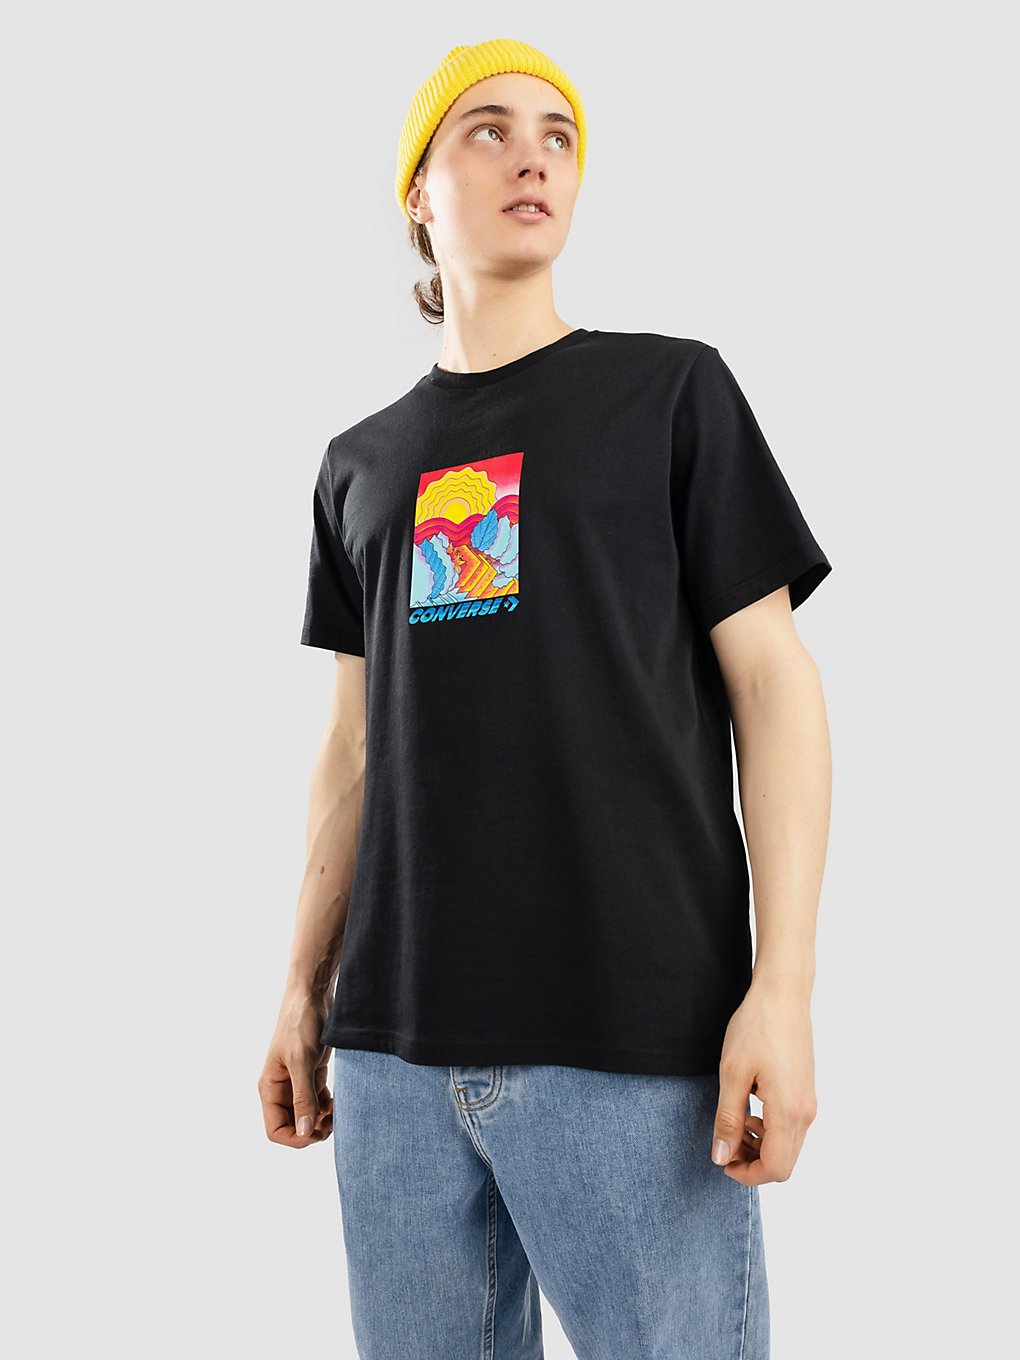 Converse Layers Of Earth T-Shirt converse black kaufen